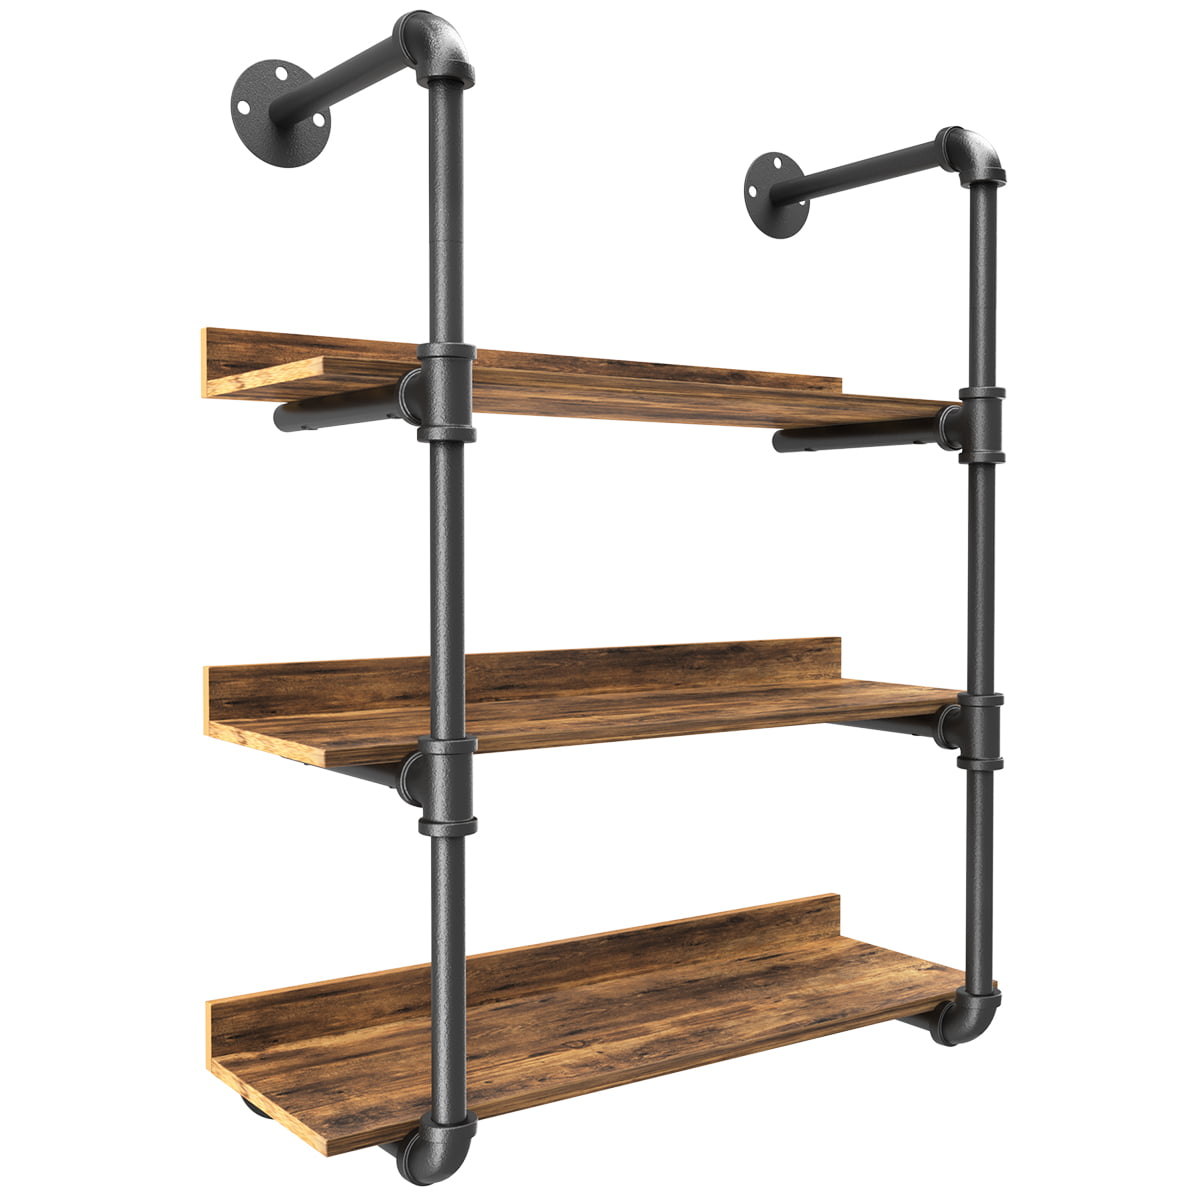 Details about   Iron Wall Mounted Hanging Shelf Storage Holder Rack Wooden Iron Home Cafe 